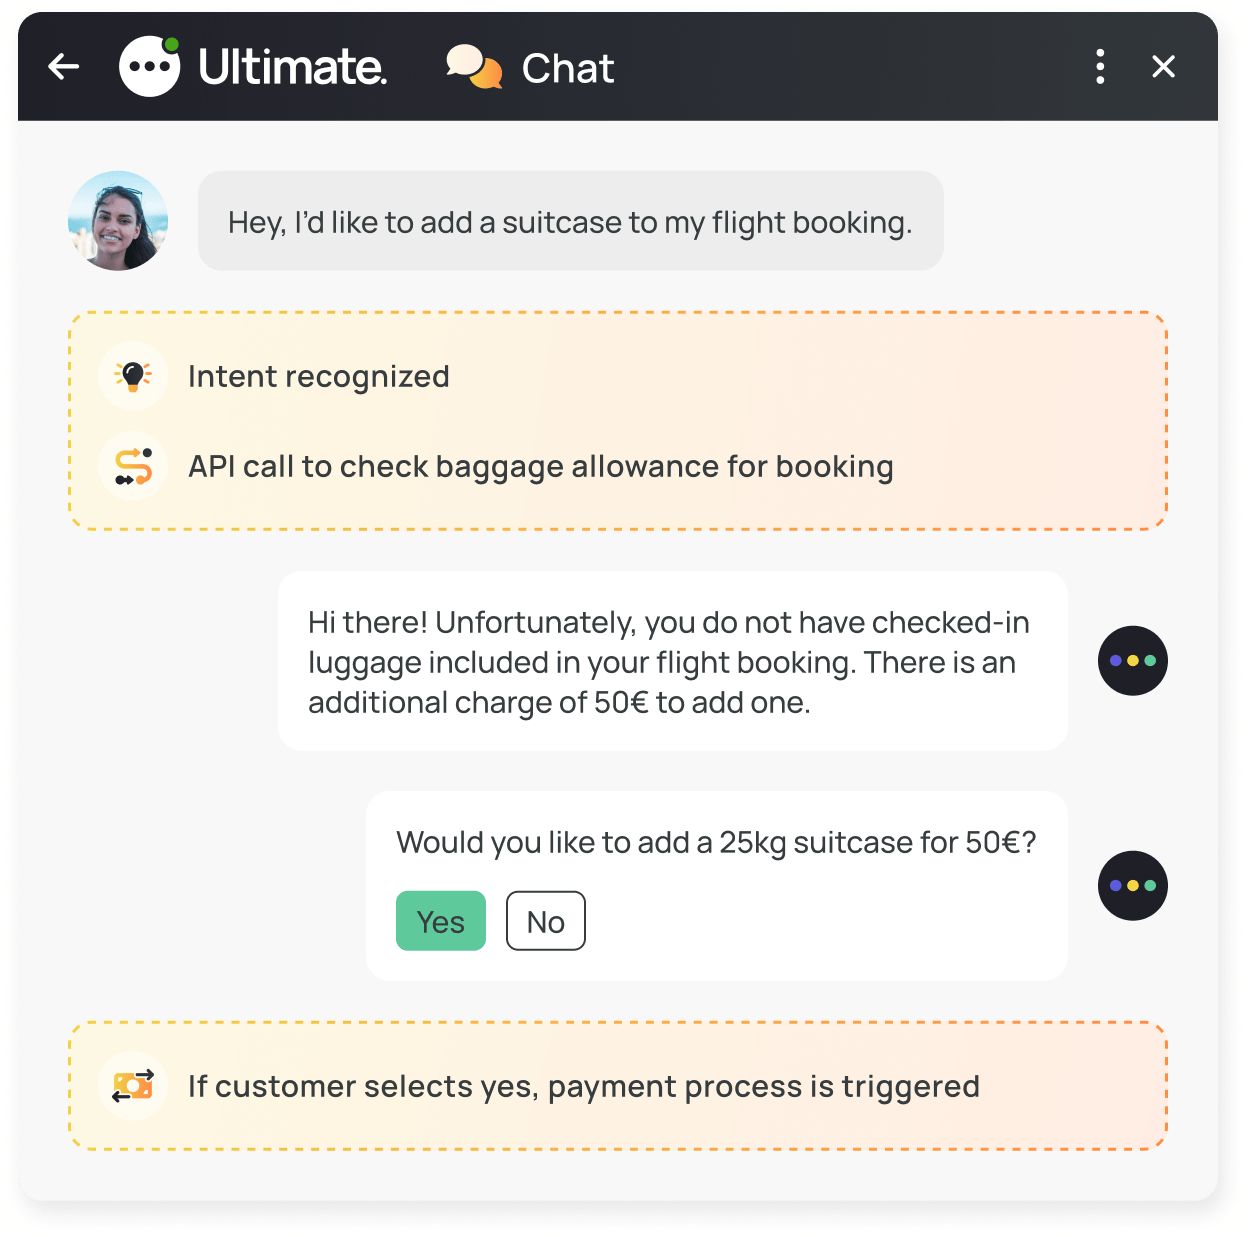 A customer wants to add a suitcase to her booking. An API integration then checks on the baggage allowance associated with her booking. Then the chatbot let's her know the cost of adding a second bag.